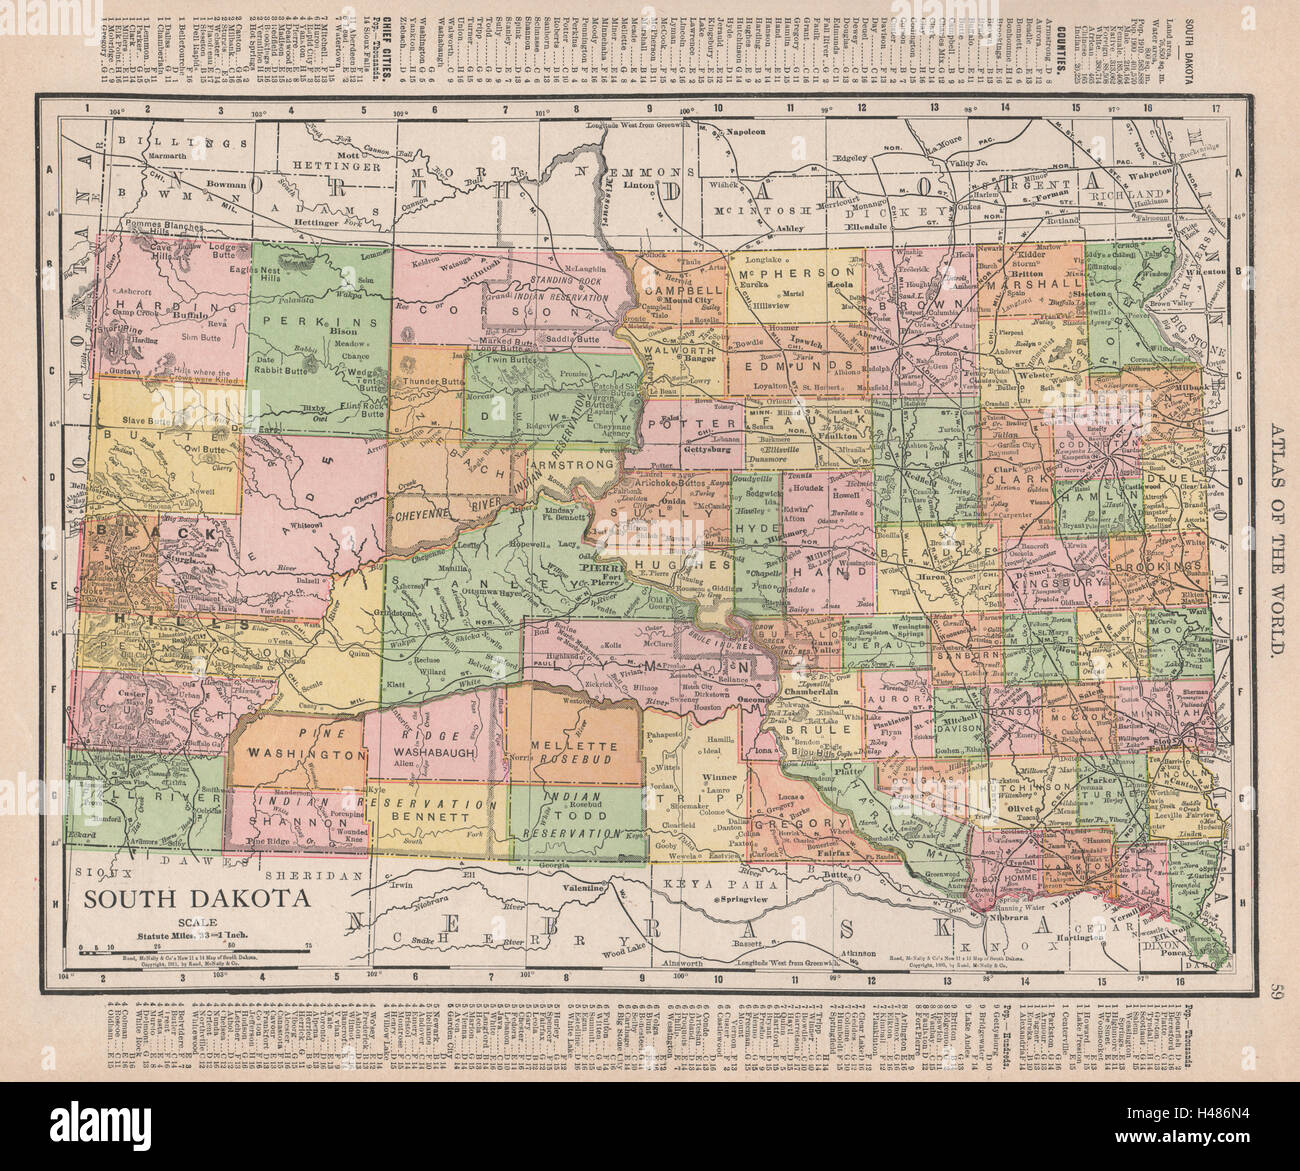 South Dakota state map showing counties. RAND MCNALLY 1912 old antique Stock Photo